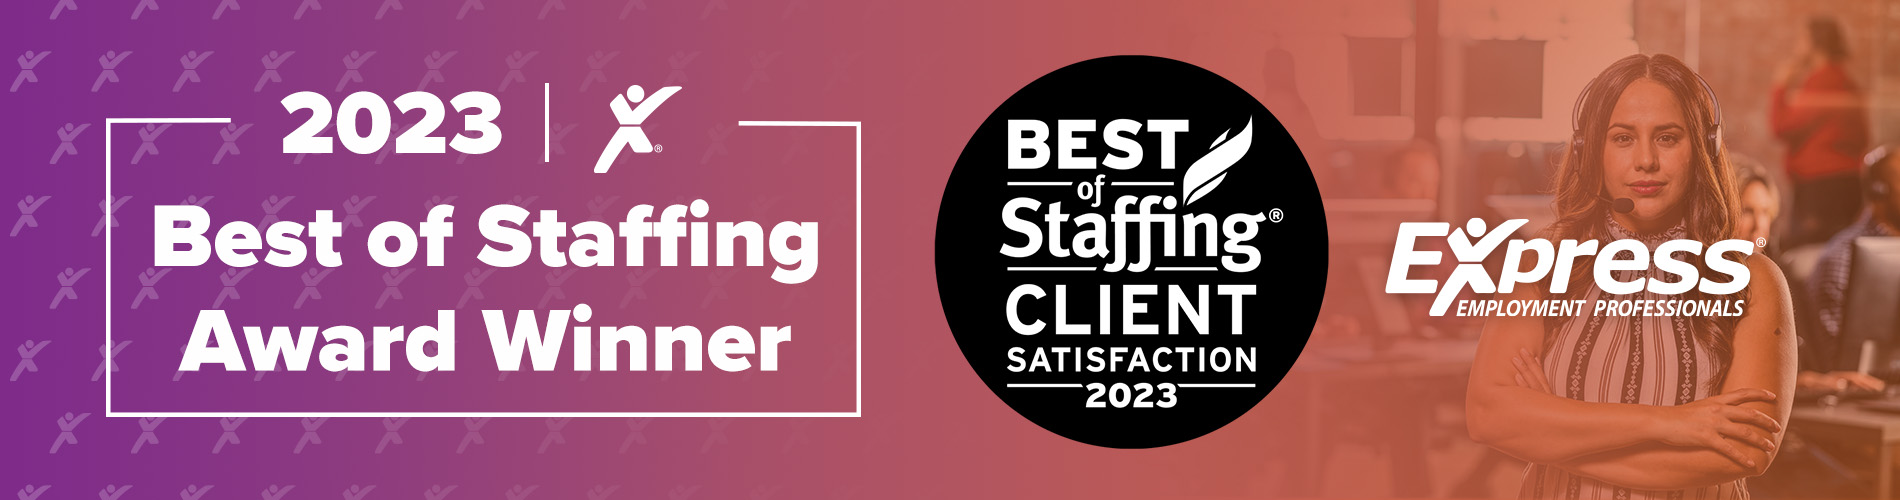 Best-of-Staffing-Client-Award-Home-Banner-2023